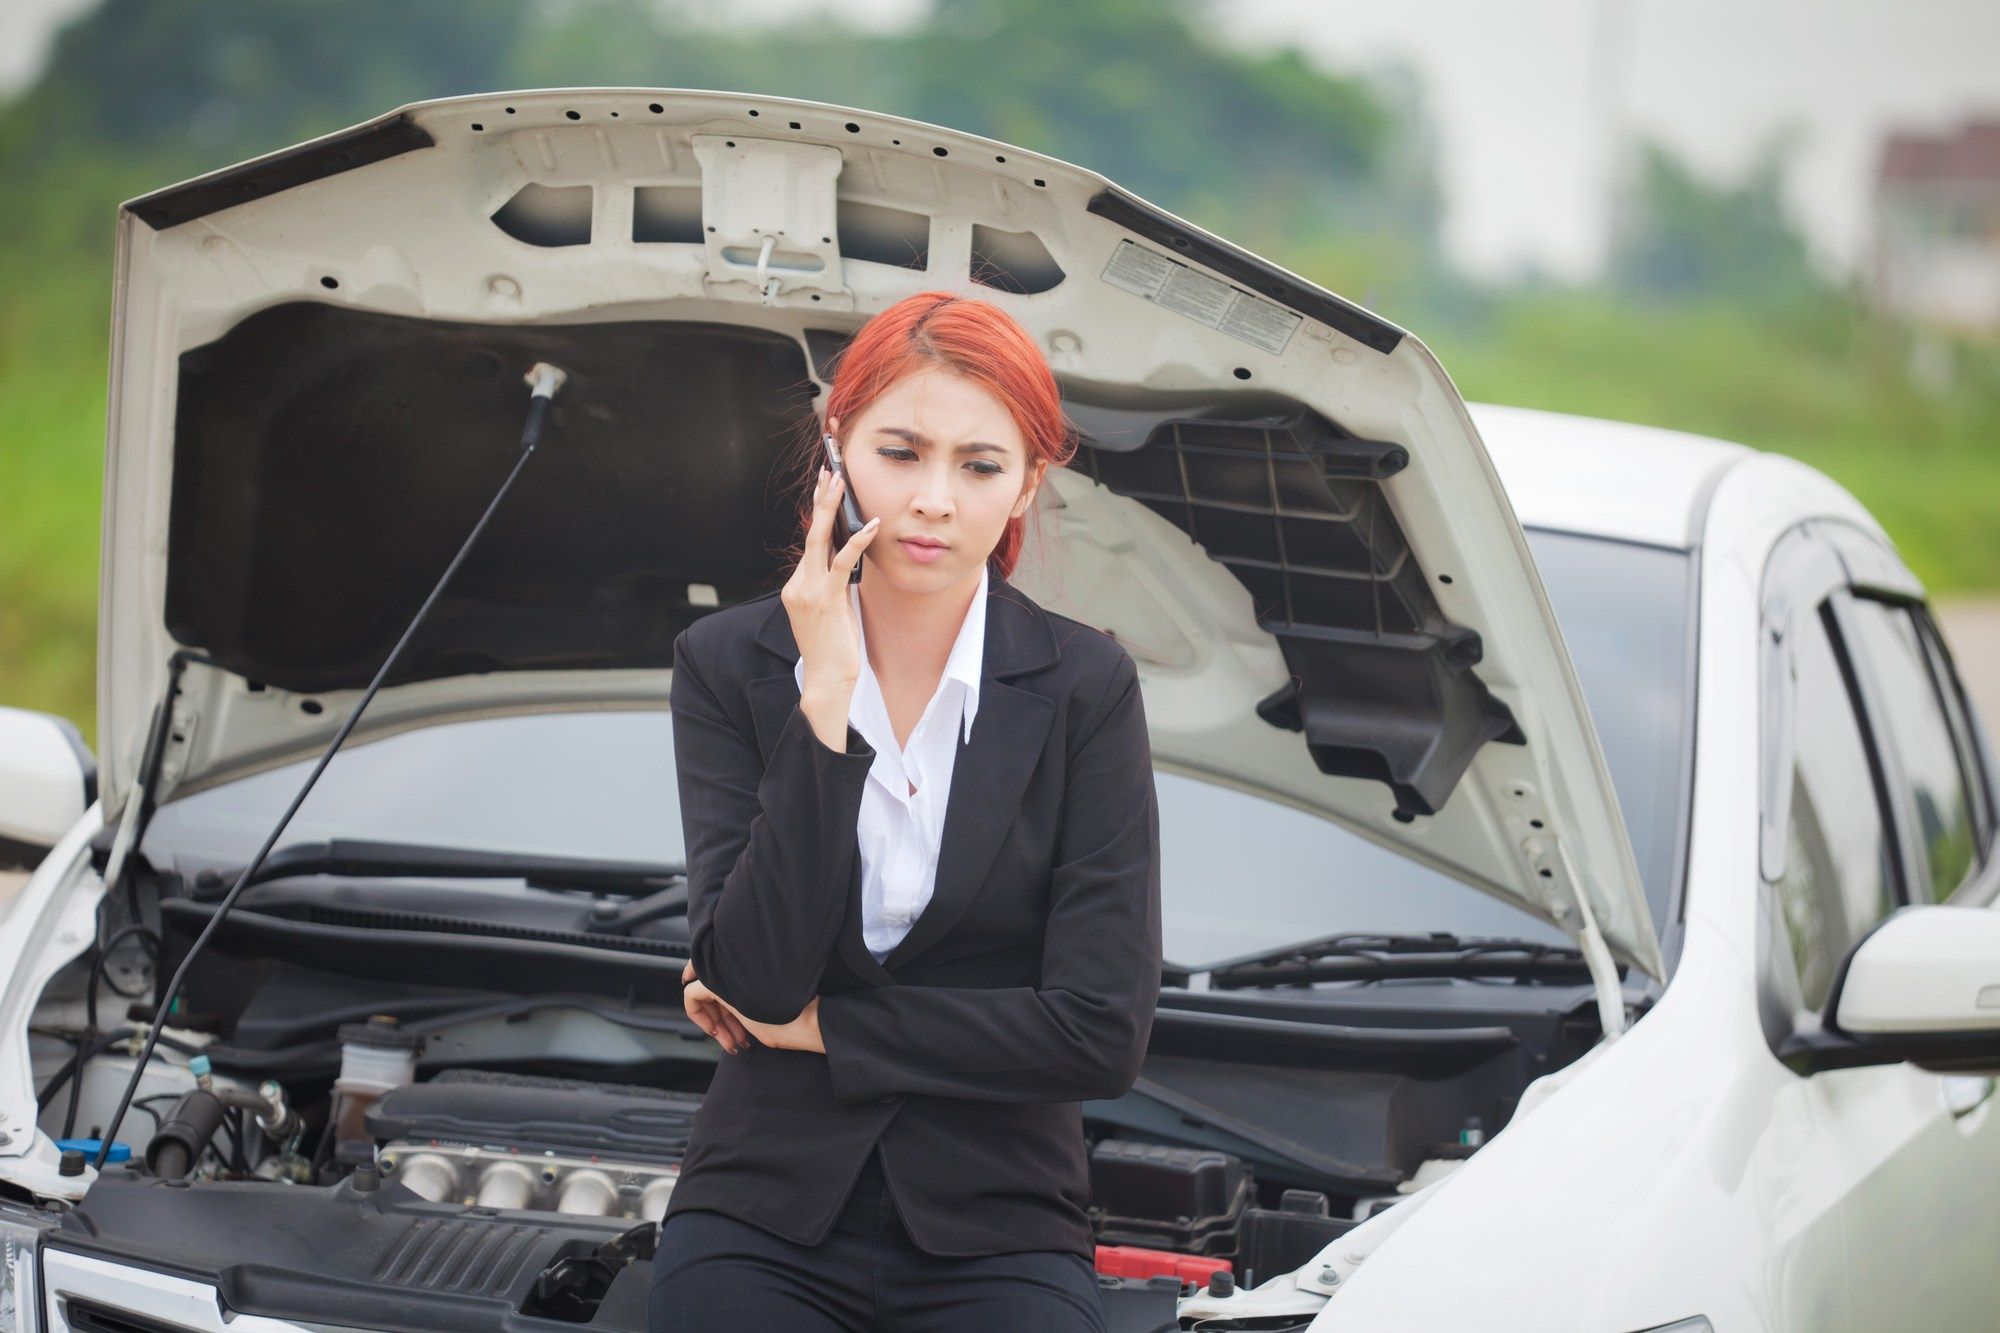 Young woman stands in front of broken down car